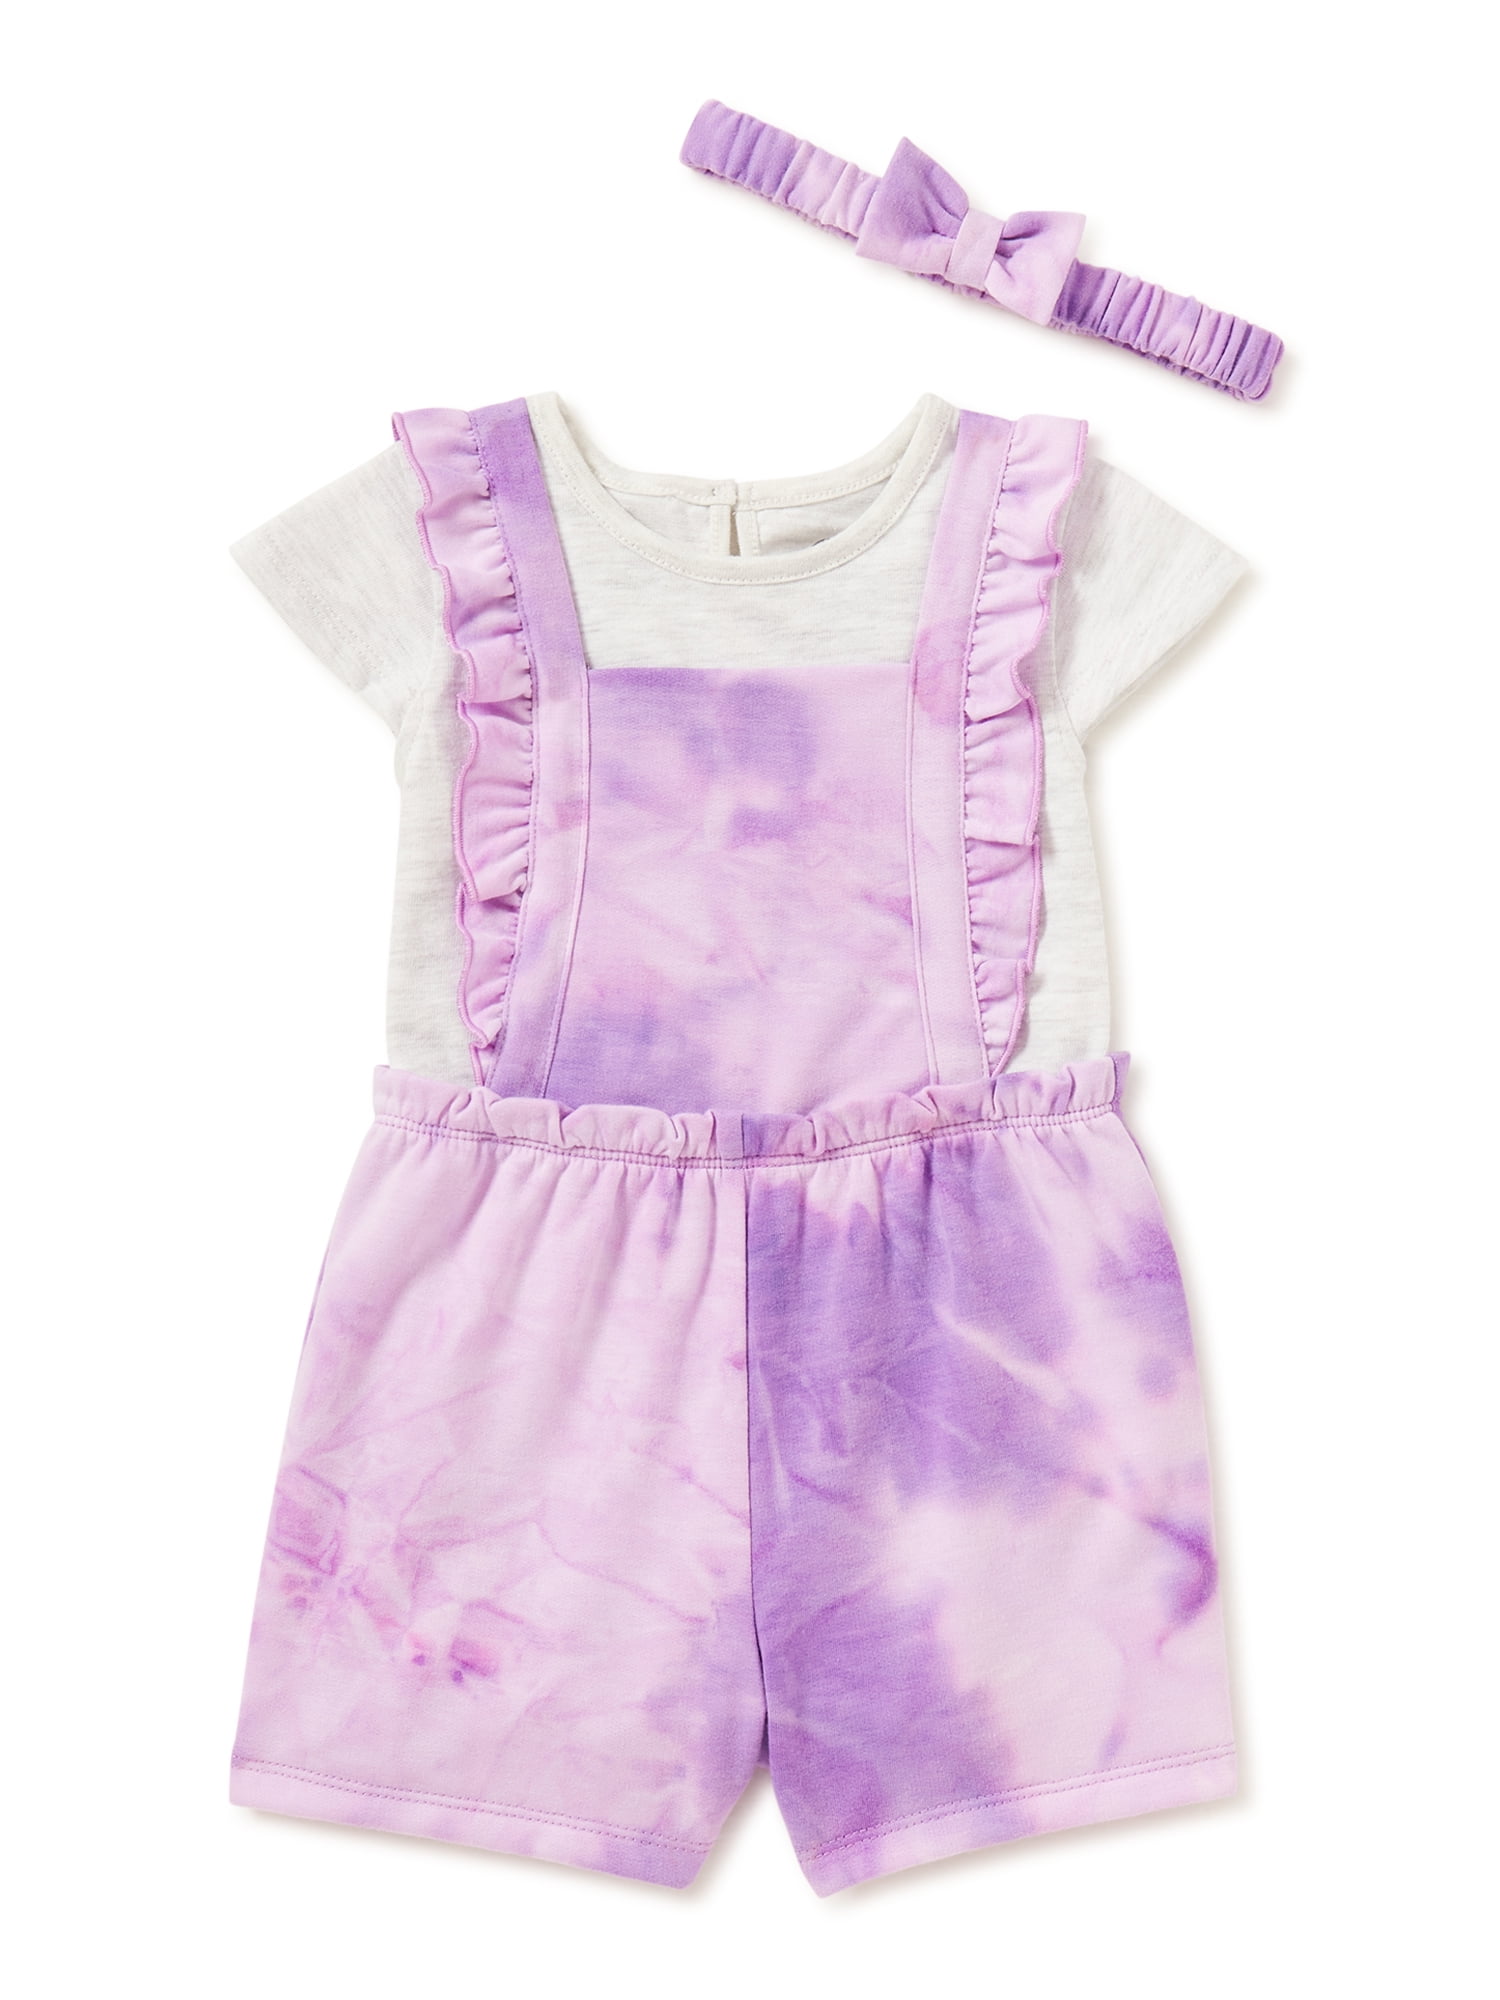 Girls OLD NAVY Pink & White Floral Embroidered One-Piece Outfit 0-3 Months New 